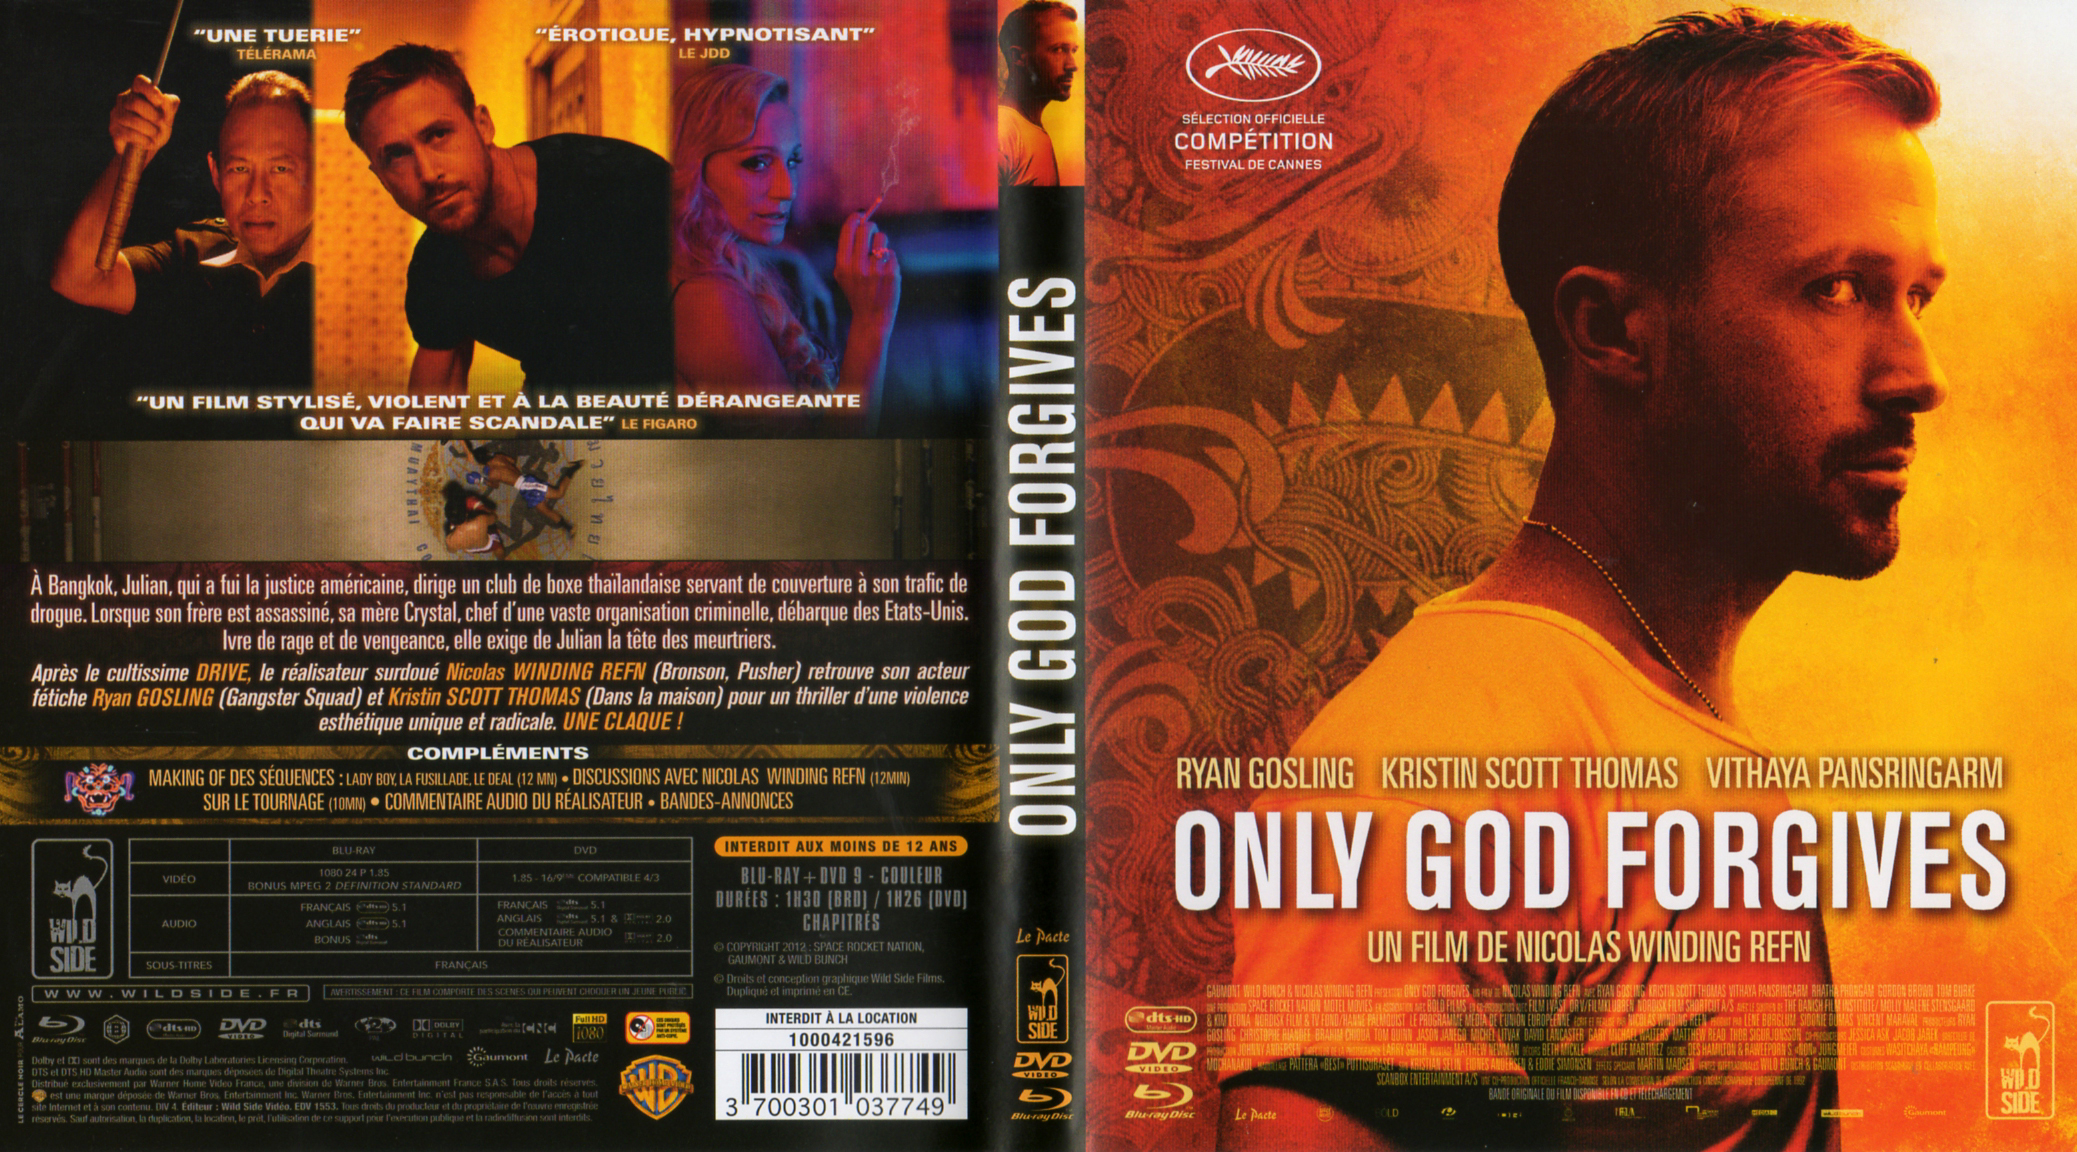 Jaquette DVD Only God Forgives (BLU-RAY)